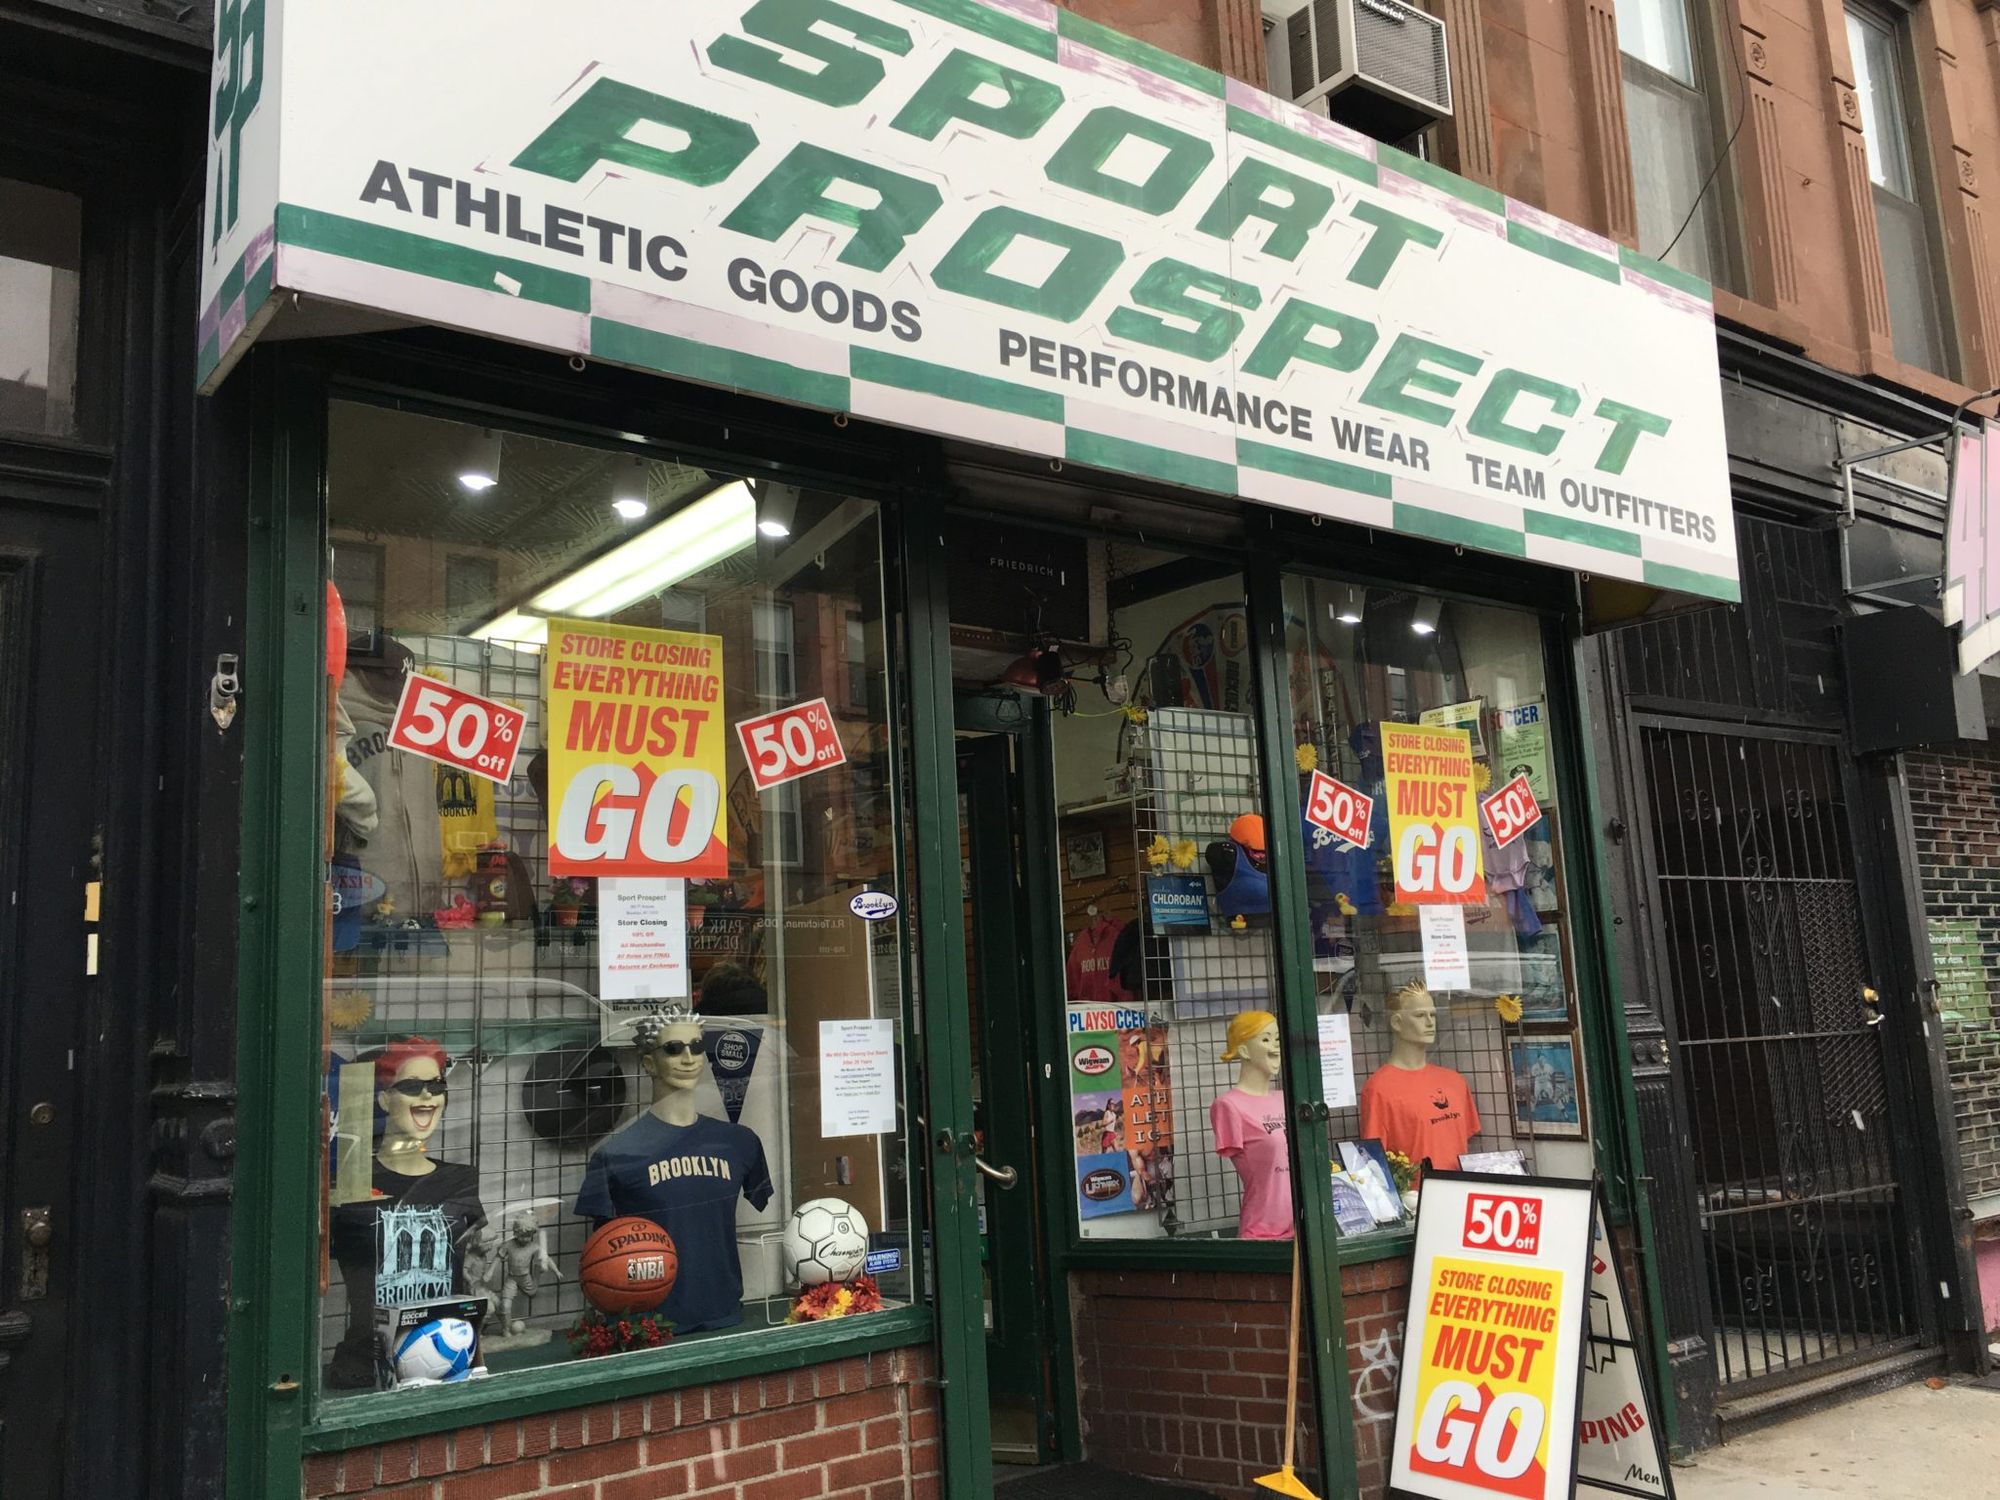 Farewell To Sport Prospect, Park Slope’s Little League Supplier For 29 Years